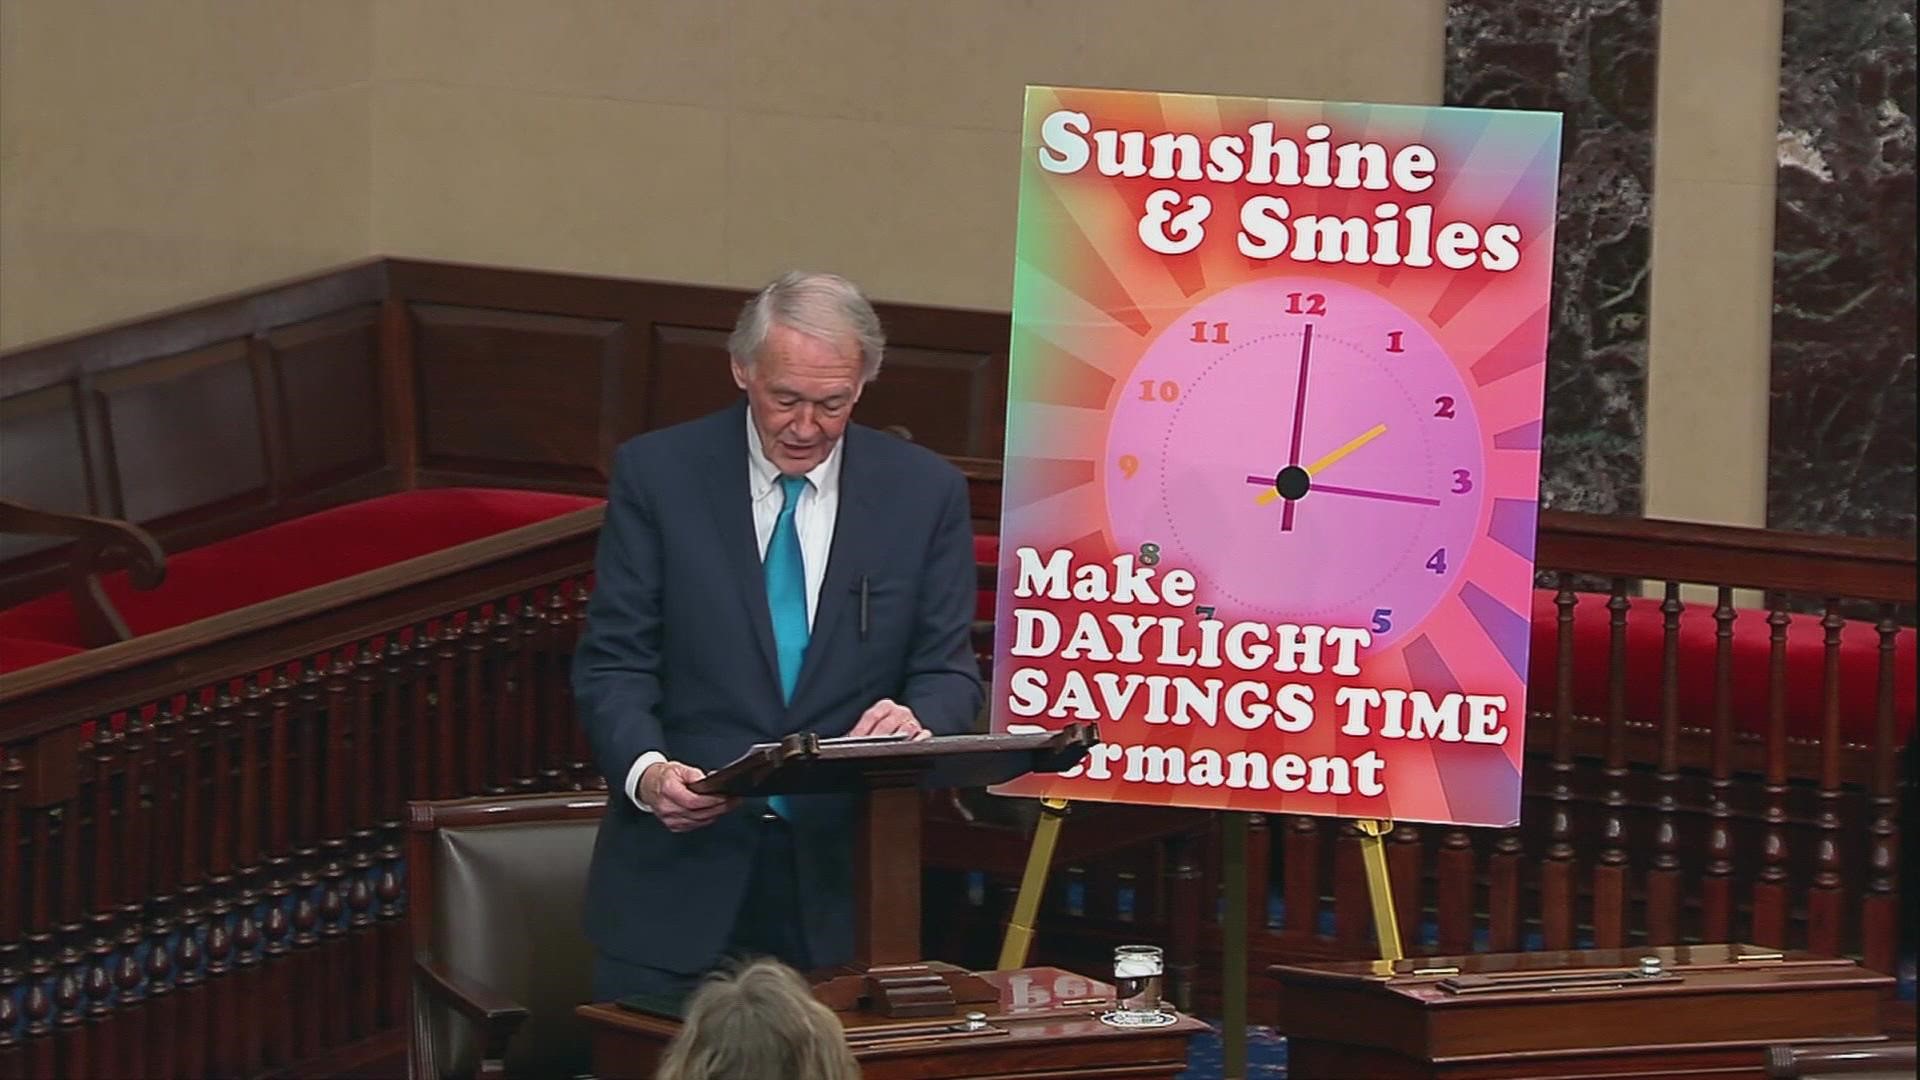 What do you think? Should Daylight Saving Time be permanent?